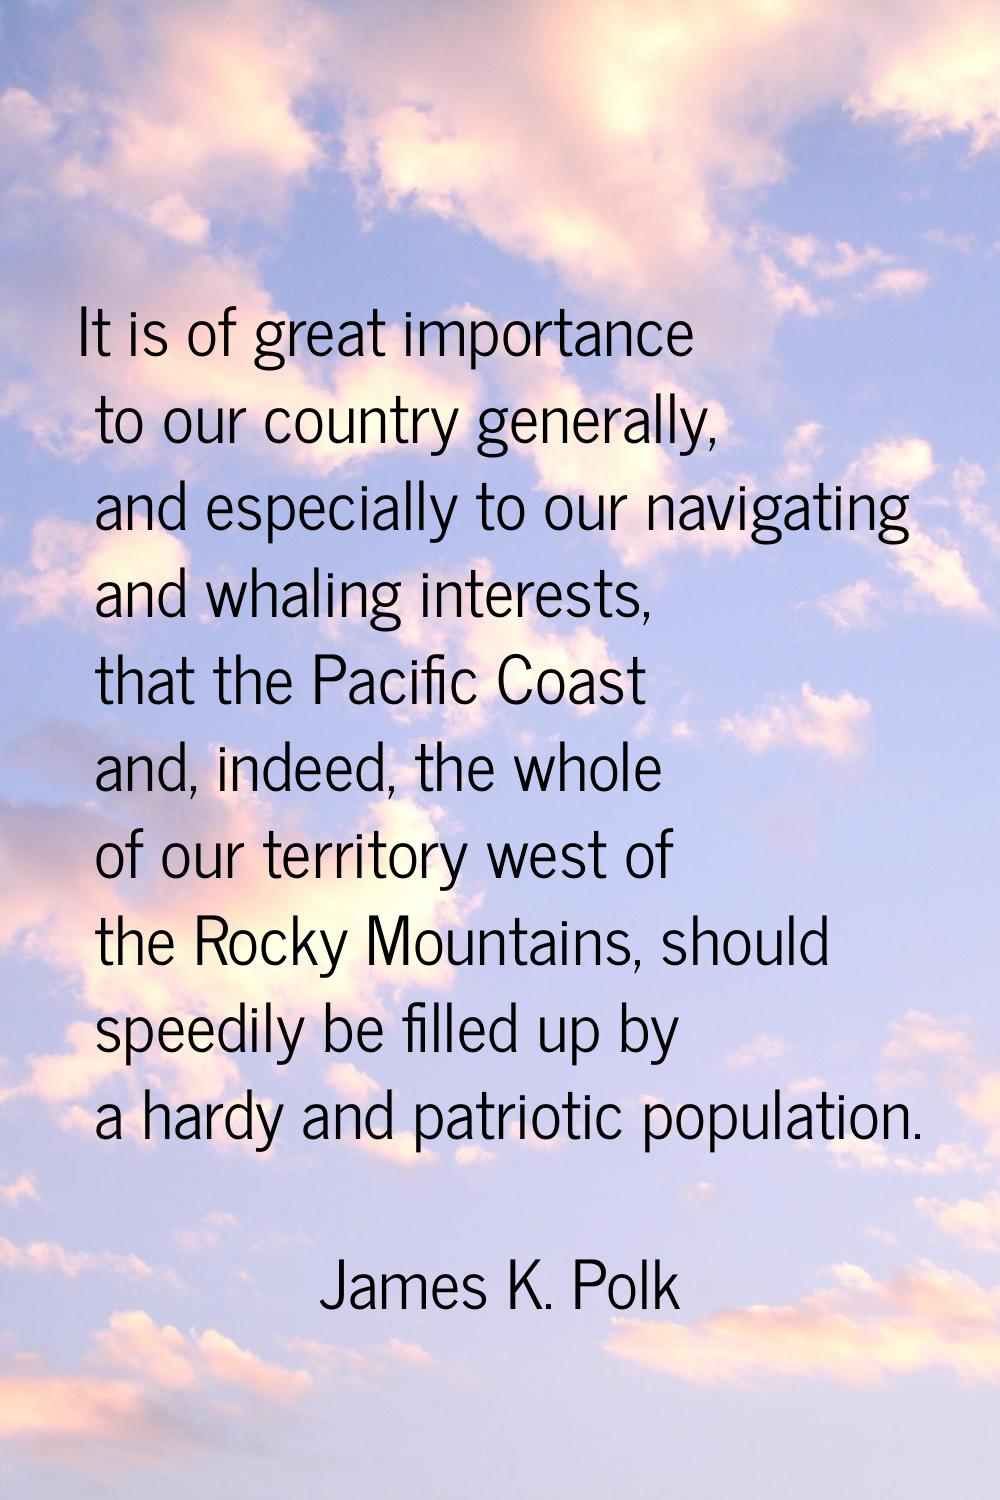 It is of great importance to our country generally, and especially to our navigating and whaling in